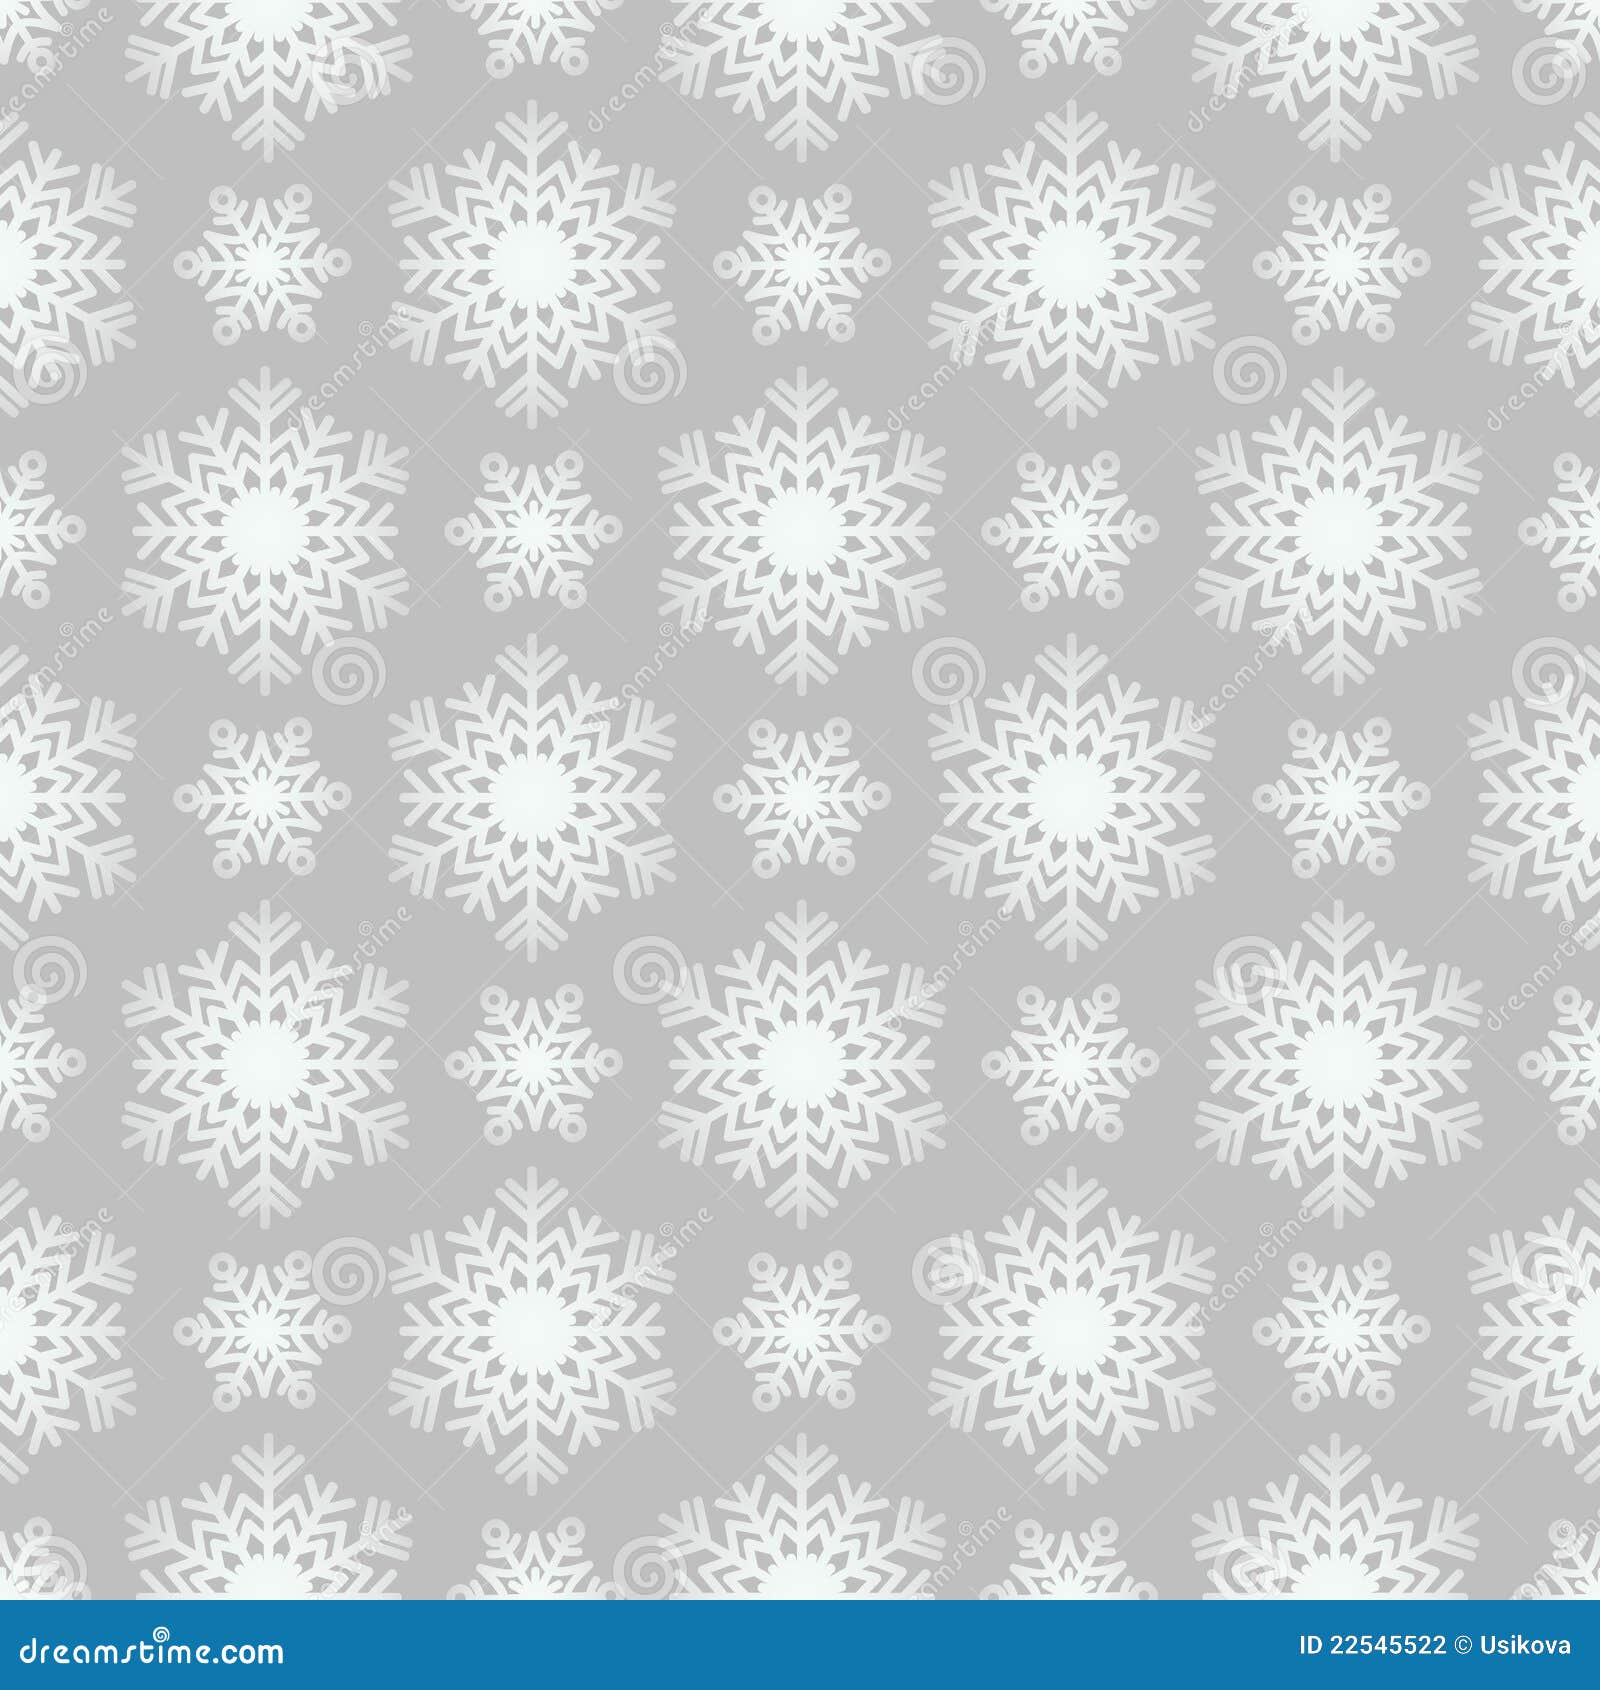 snow backgrounds tumblr Pattern On Stock Gray Photography Background Snowflake